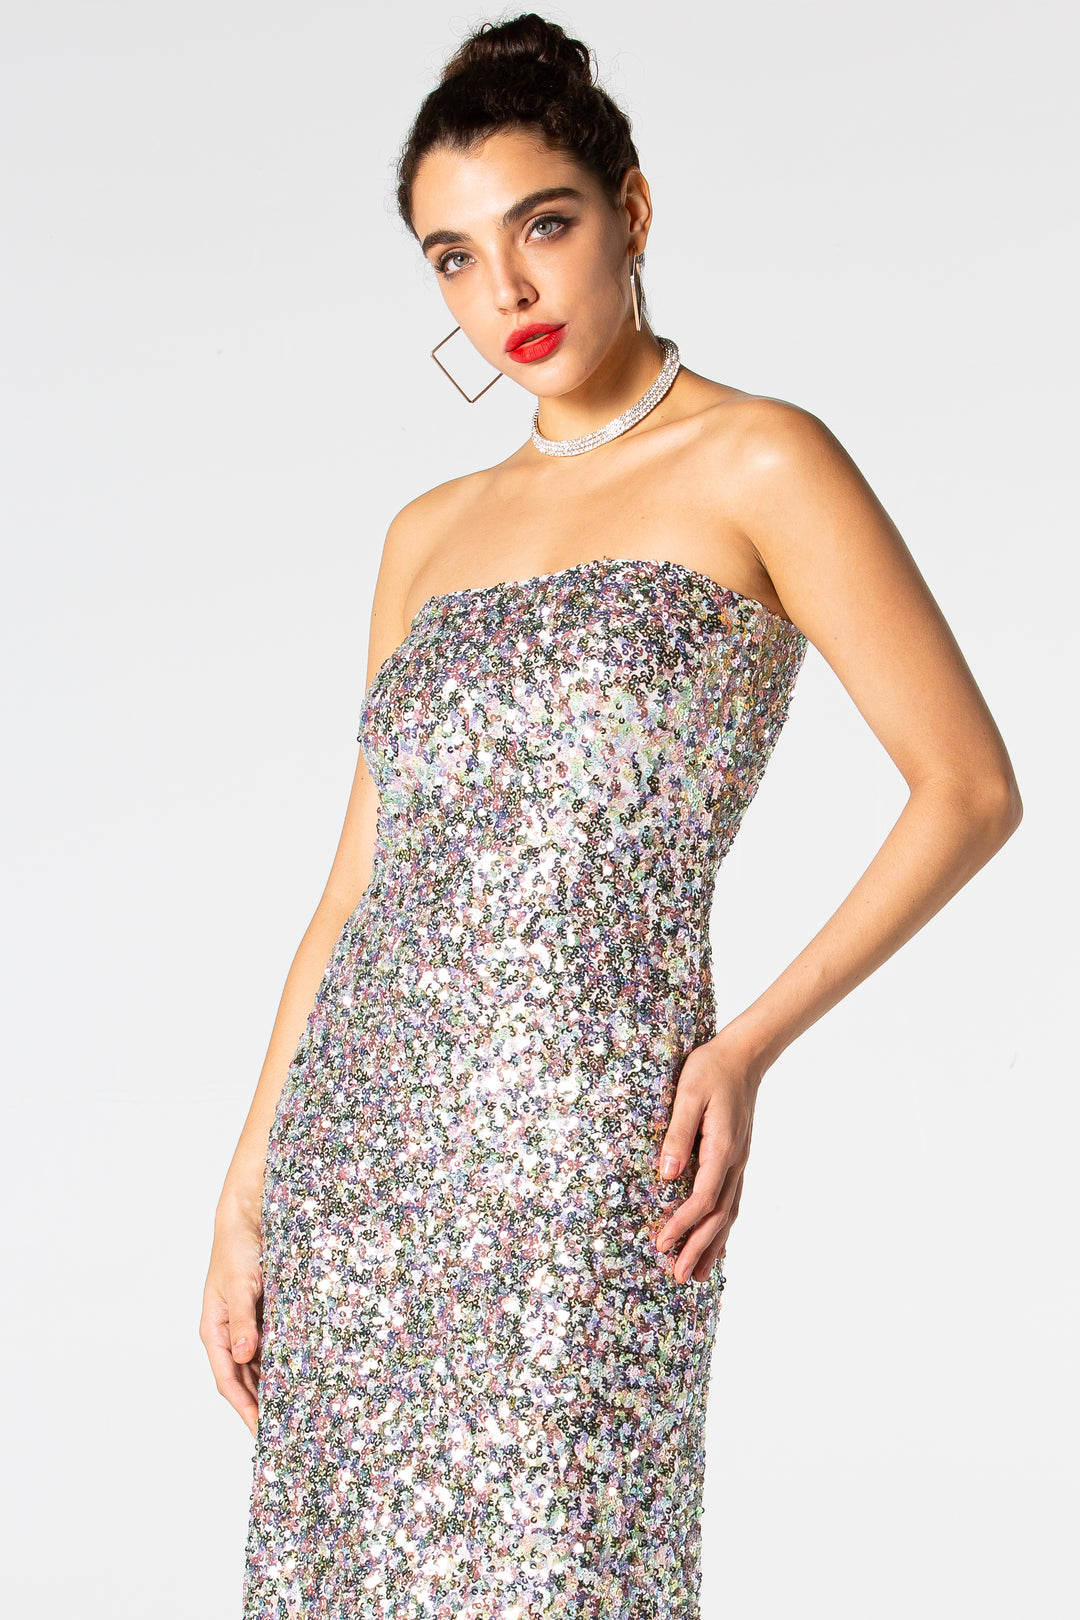 Sesidy Marina Silver Sequin Strapless Dress in Silver